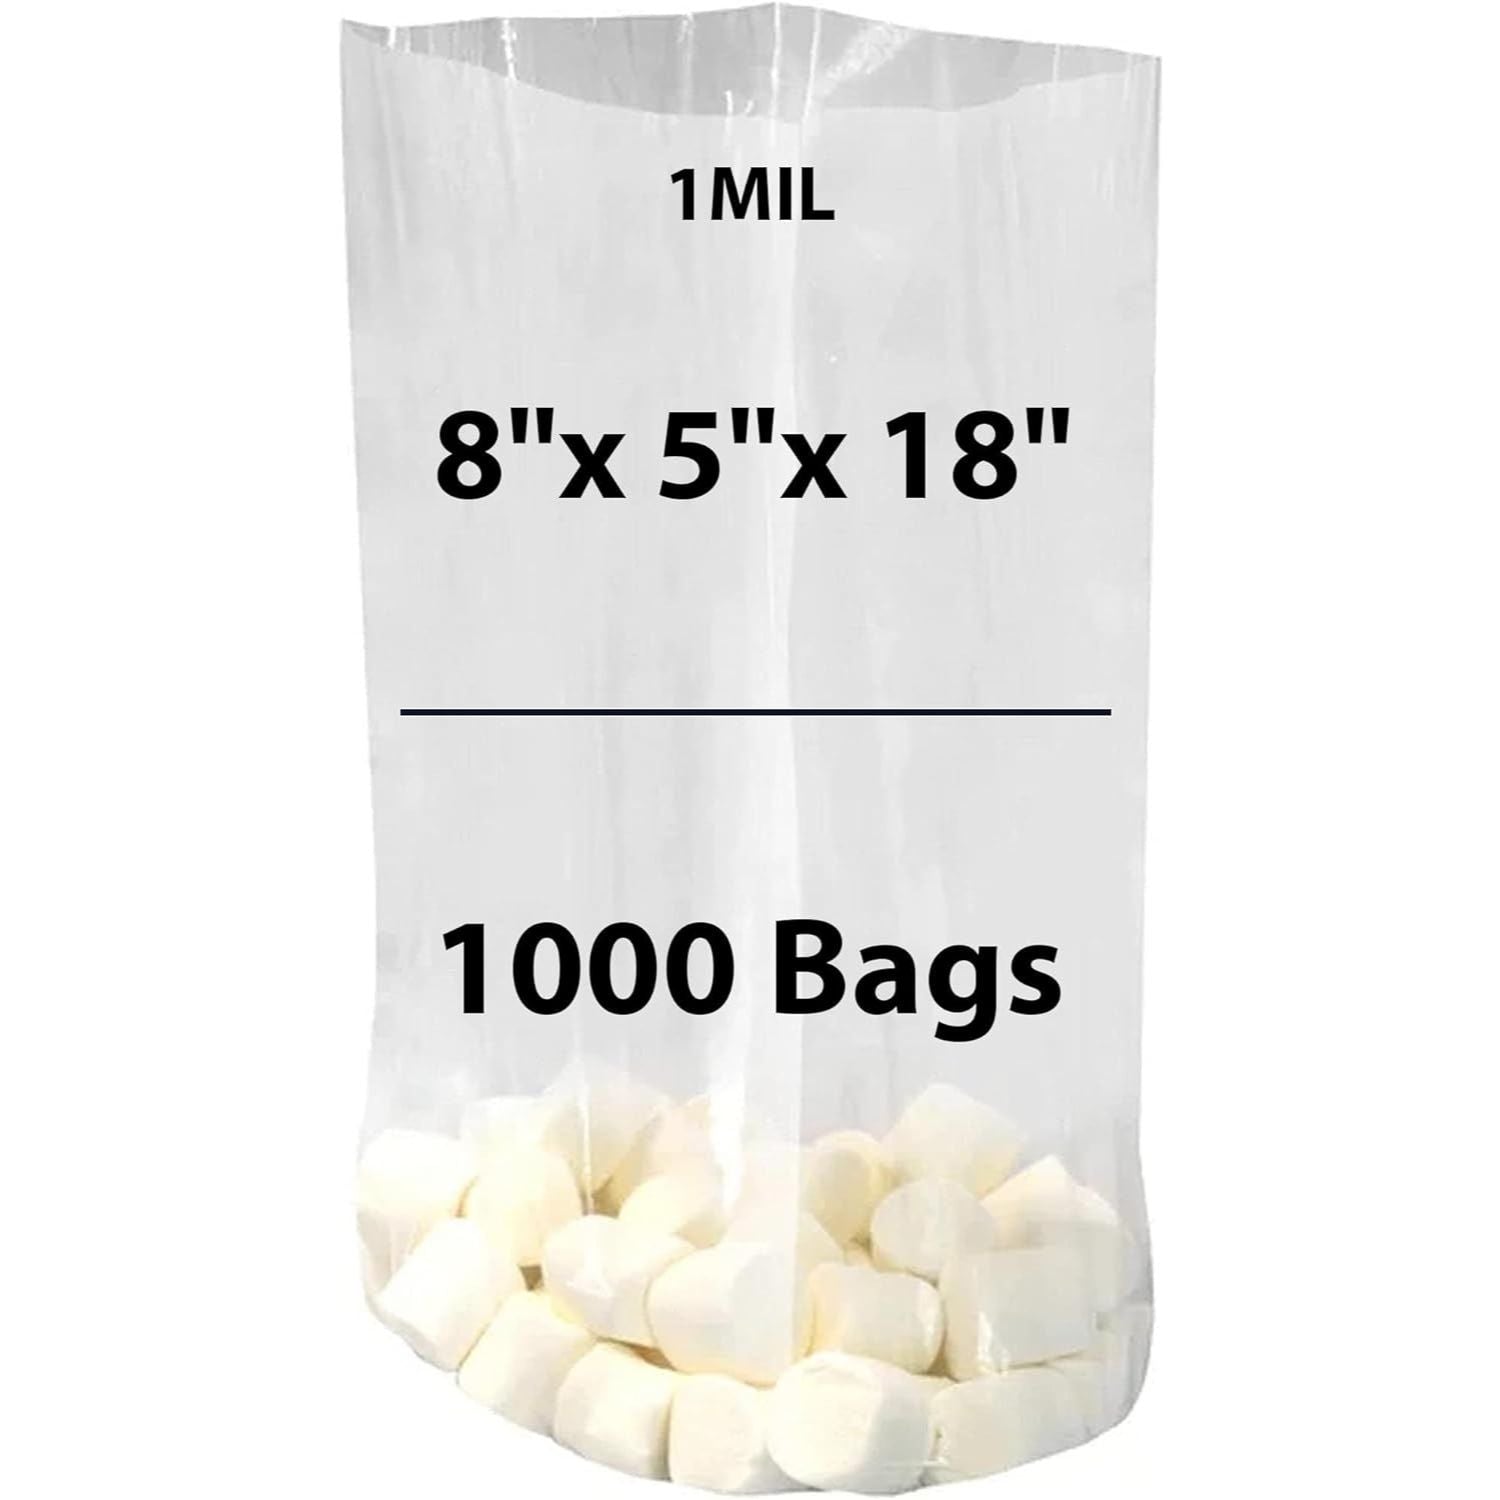 Clear Gusseted Poly bags 1 Mil, 8 inch X 5 inch X 18 inch Pack of 1000 Bags